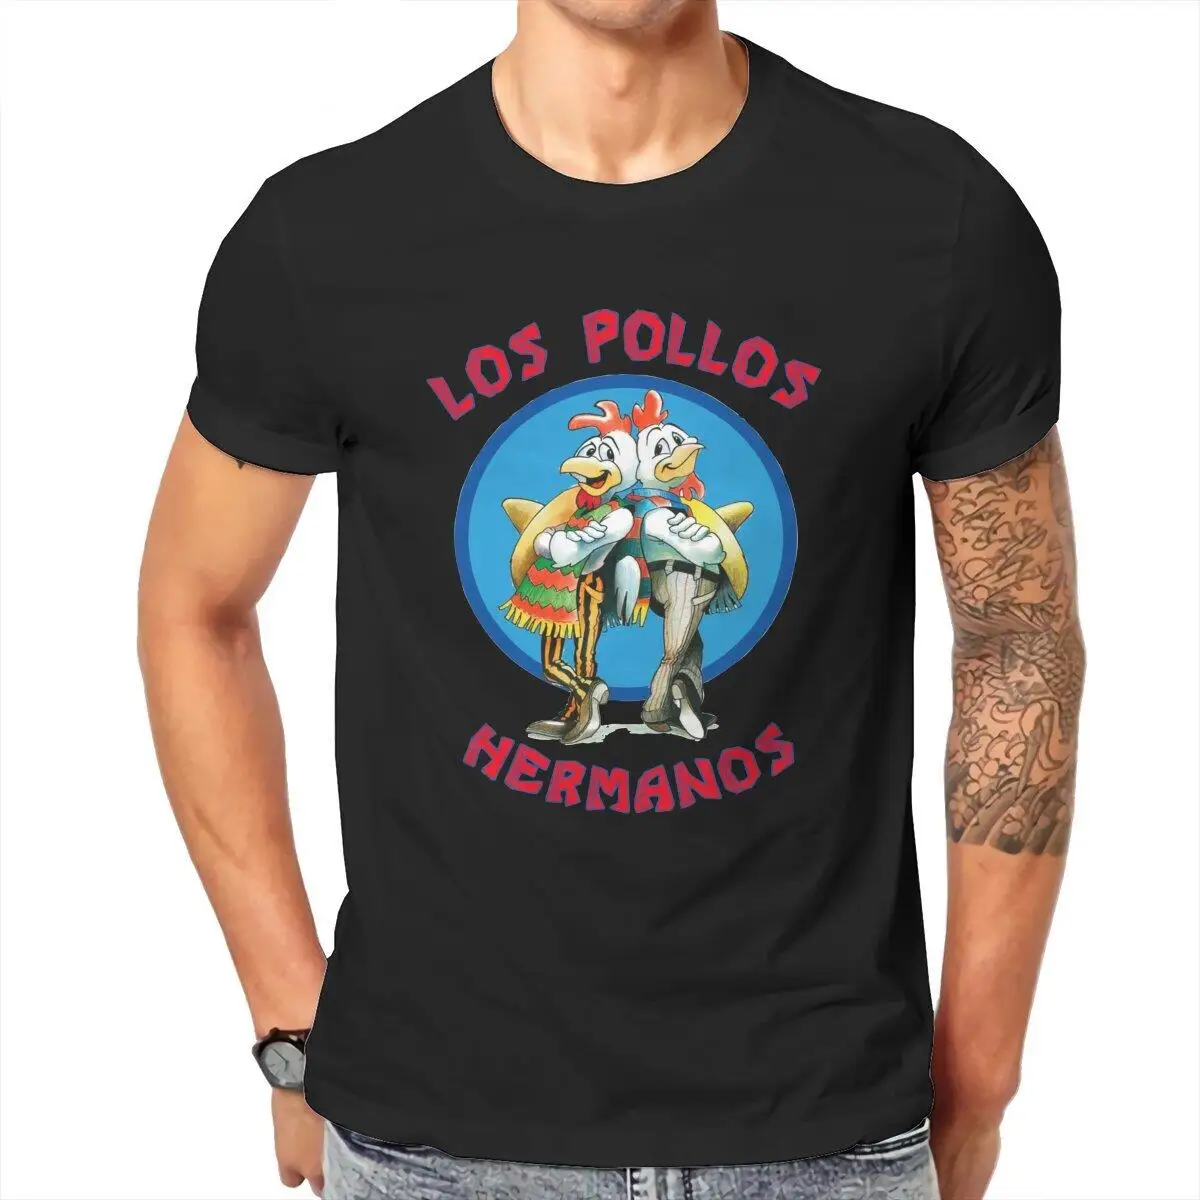 Los Pollos Hermanos  T-Shirt for Men Breaking Bad Chicken Brothers Vintage Pure Cotton Tees Short Sleeve T Shirts Gift Idea Tops